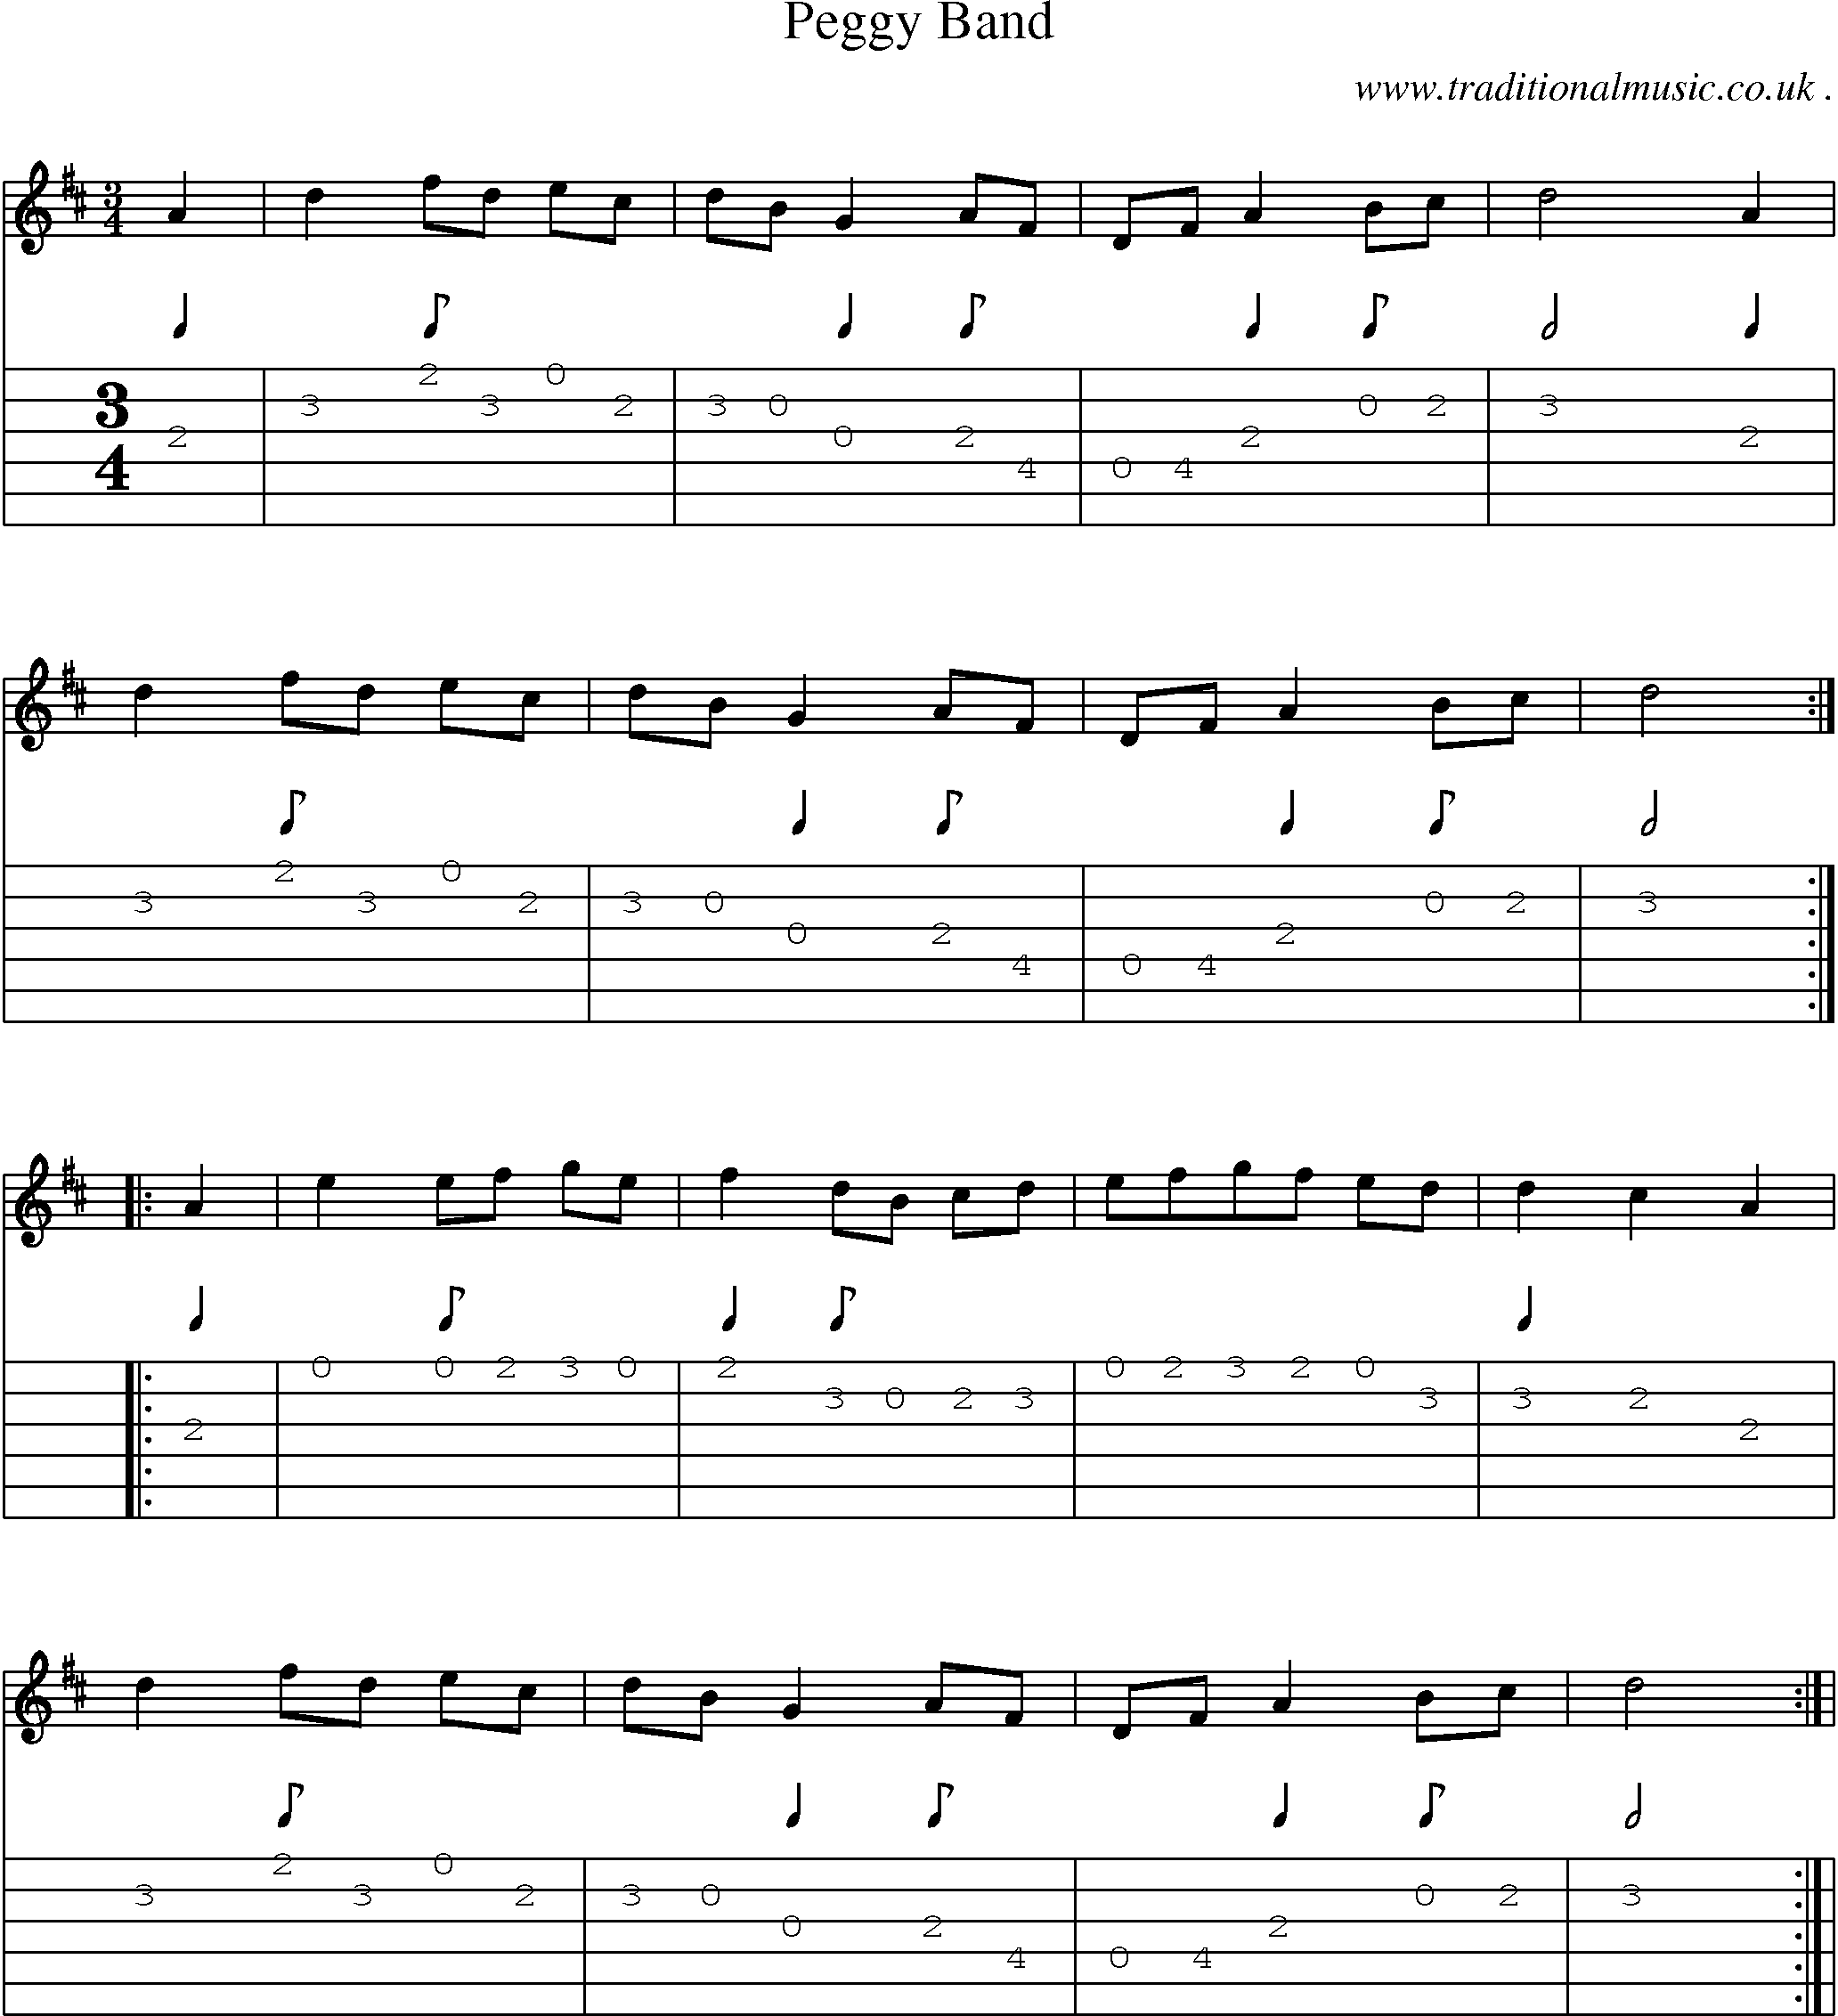 Sheet-Music and Guitar Tabs for Peggy Band